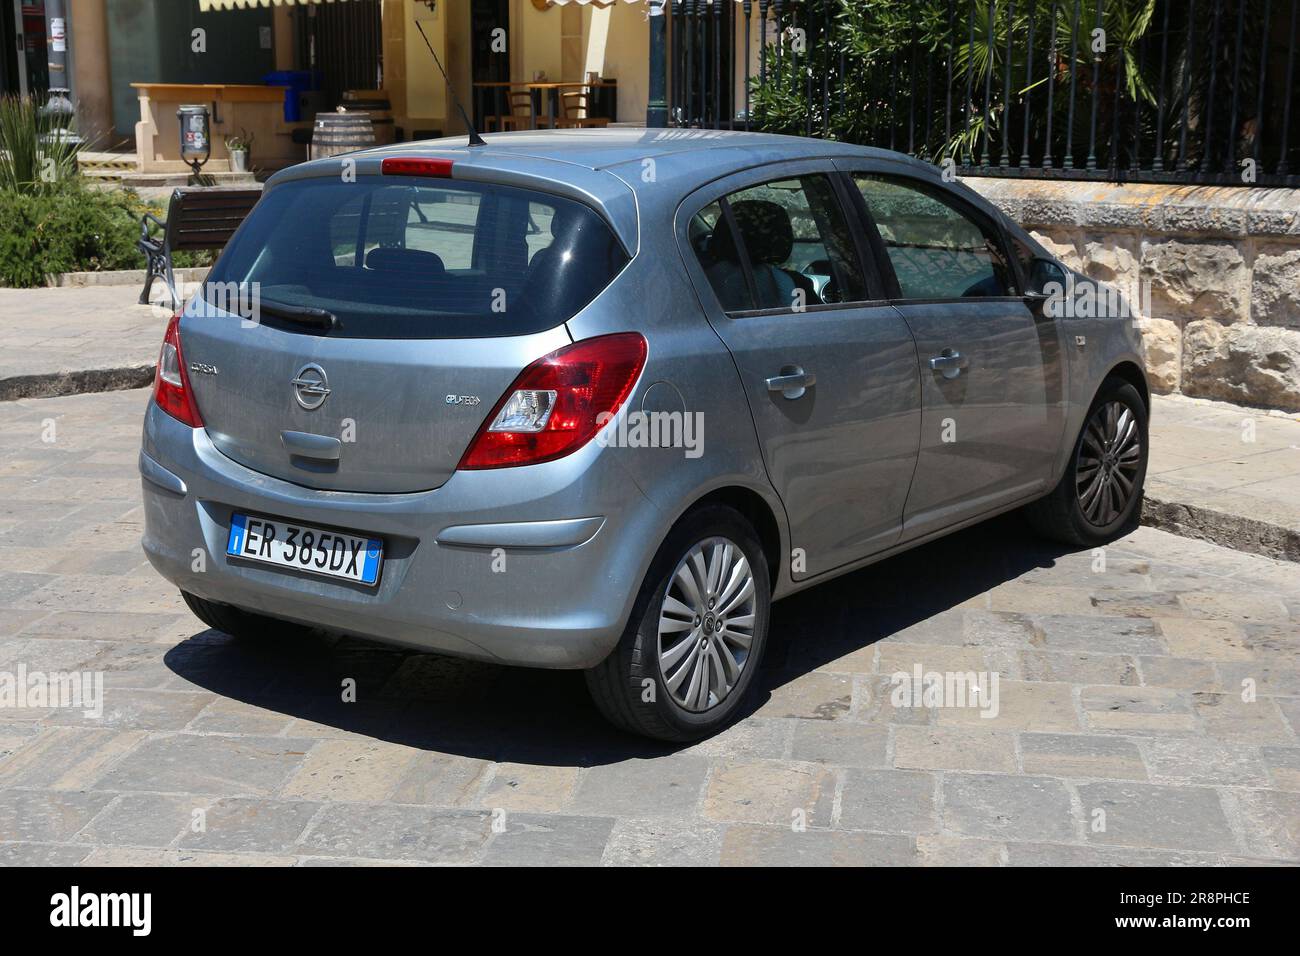 NARDO, ITALY - MAY 30, 2017: Opel Corsa hatchback city car parked in a street in Nardo, Italy. There are 41 million motor vehicles registered in Italy Stock Photo